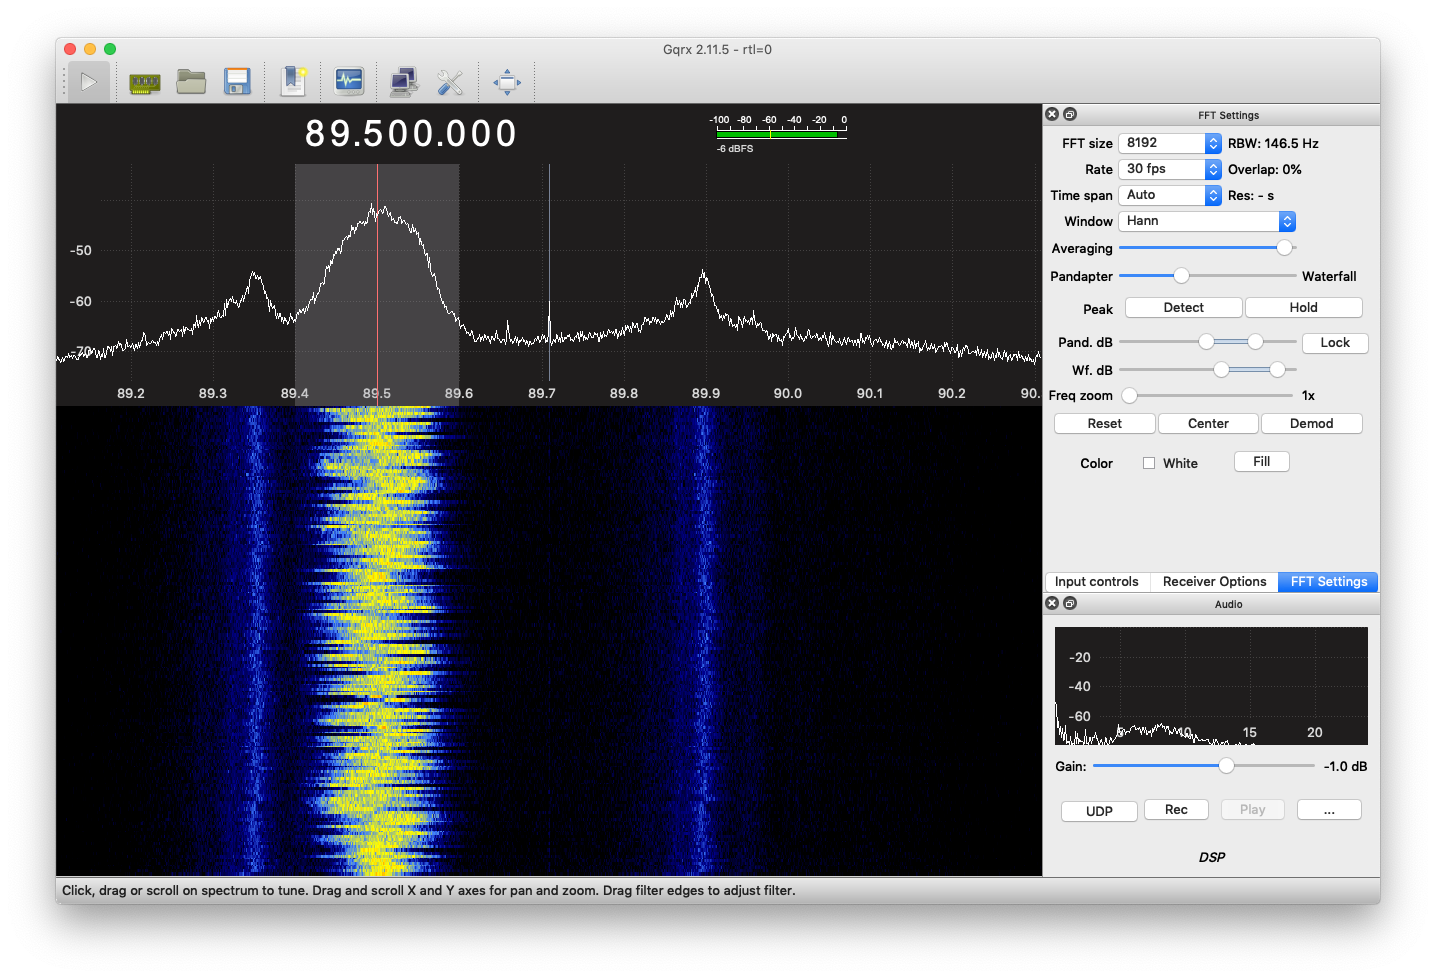 Figure 1: Listening to FM radio using an RTL-SDR dongle and GQRX app